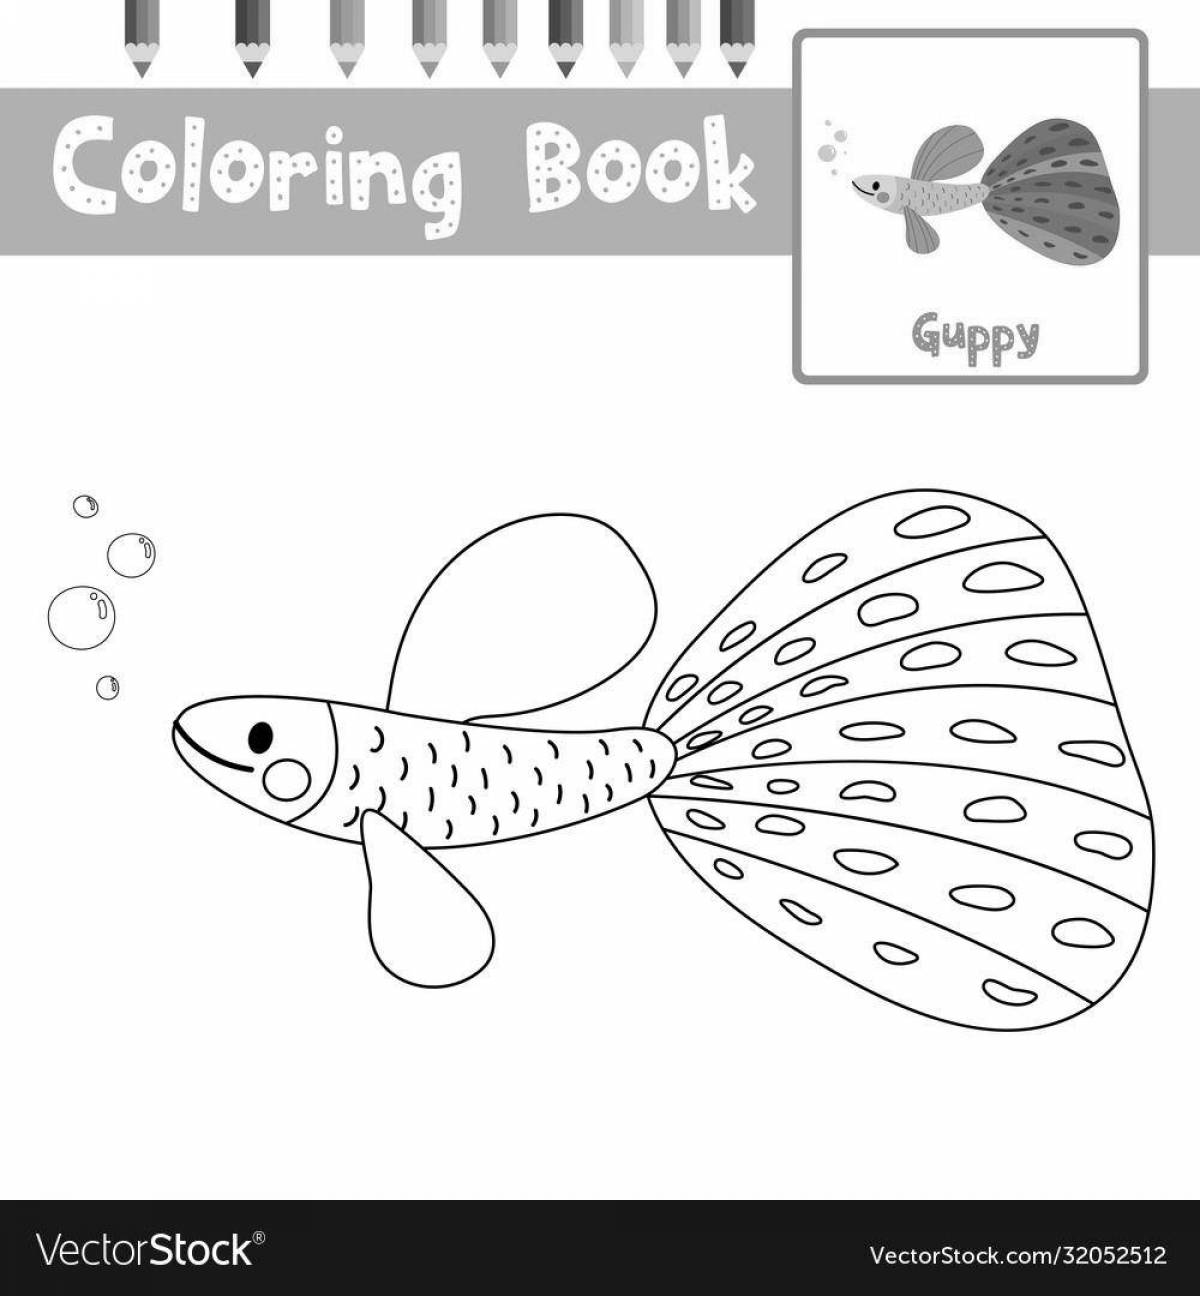 Coloring book sparkling guppy fish